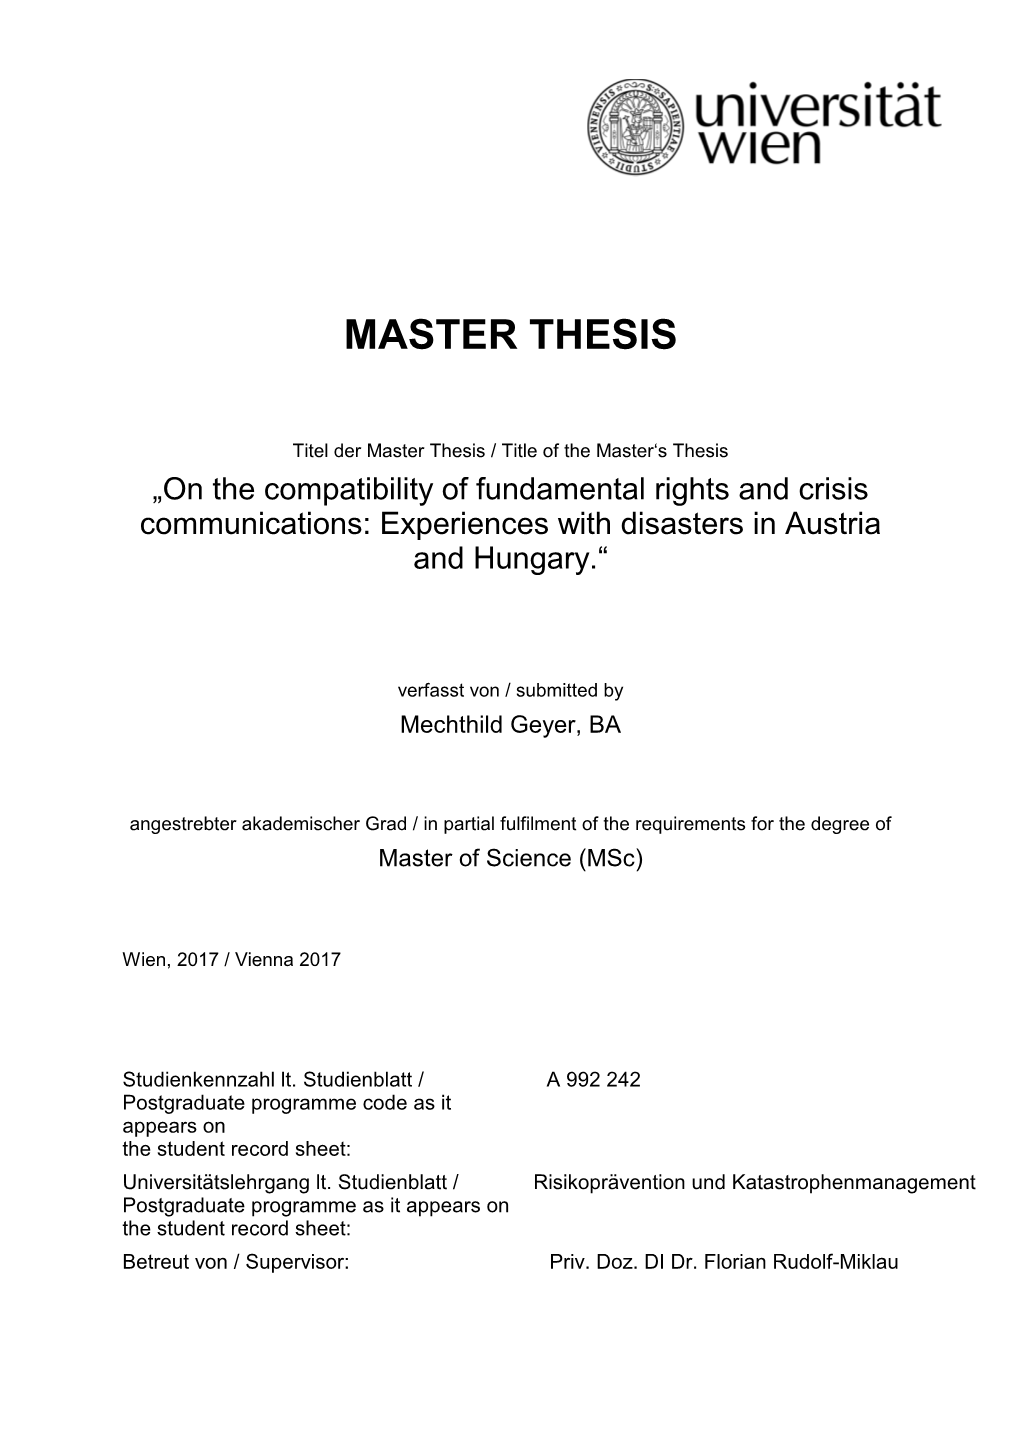 On the Compatibility of Fundamental Rights and Crisis Communications: Experiences with Disasters in Austria and Hungary.“